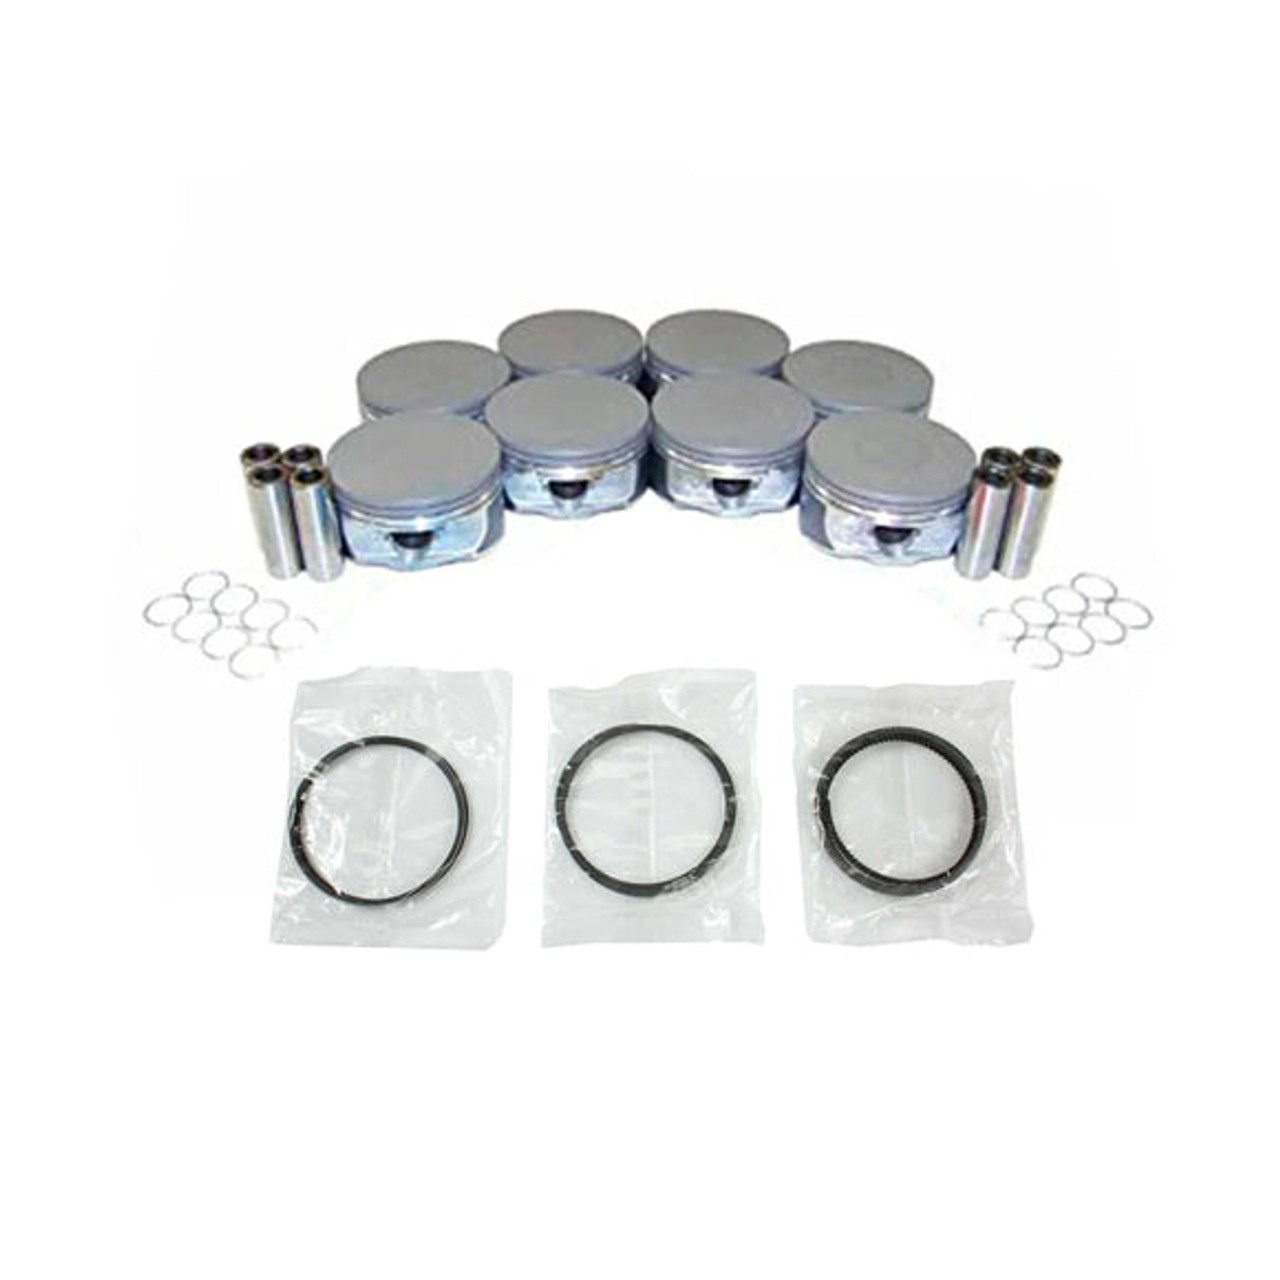 Piston Set with Rings - 2006 Cadillac CTS 6.0L Engine Parts # PRK3170ZE1